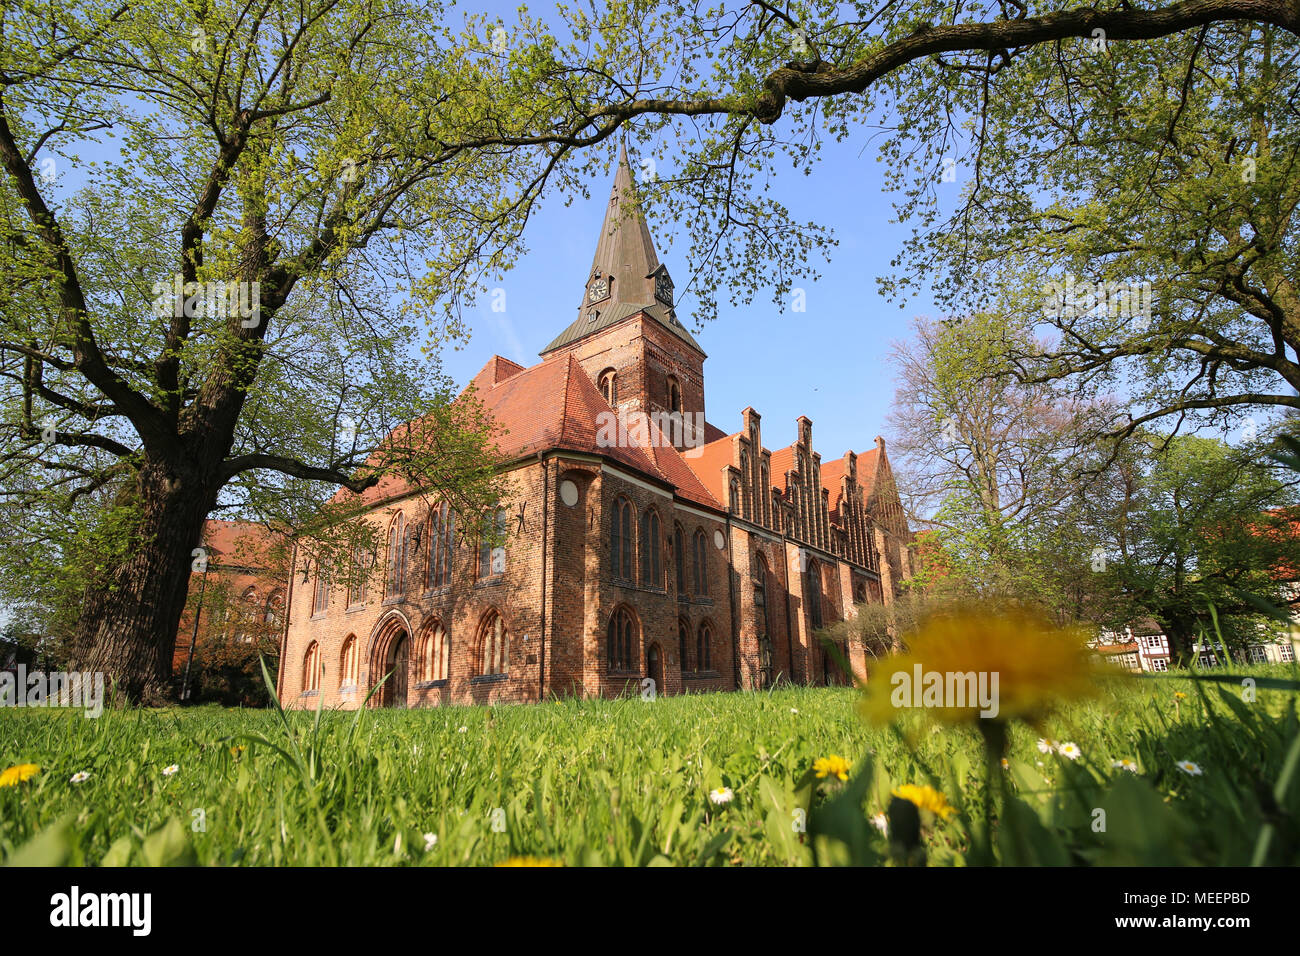 Salzwedel, Germany - April 20, 2018: View of St. Catherine's Church in the Hanseatic city of Salzwedel in Altmark, Germany. Her patron saint is Saint  Stock Photo